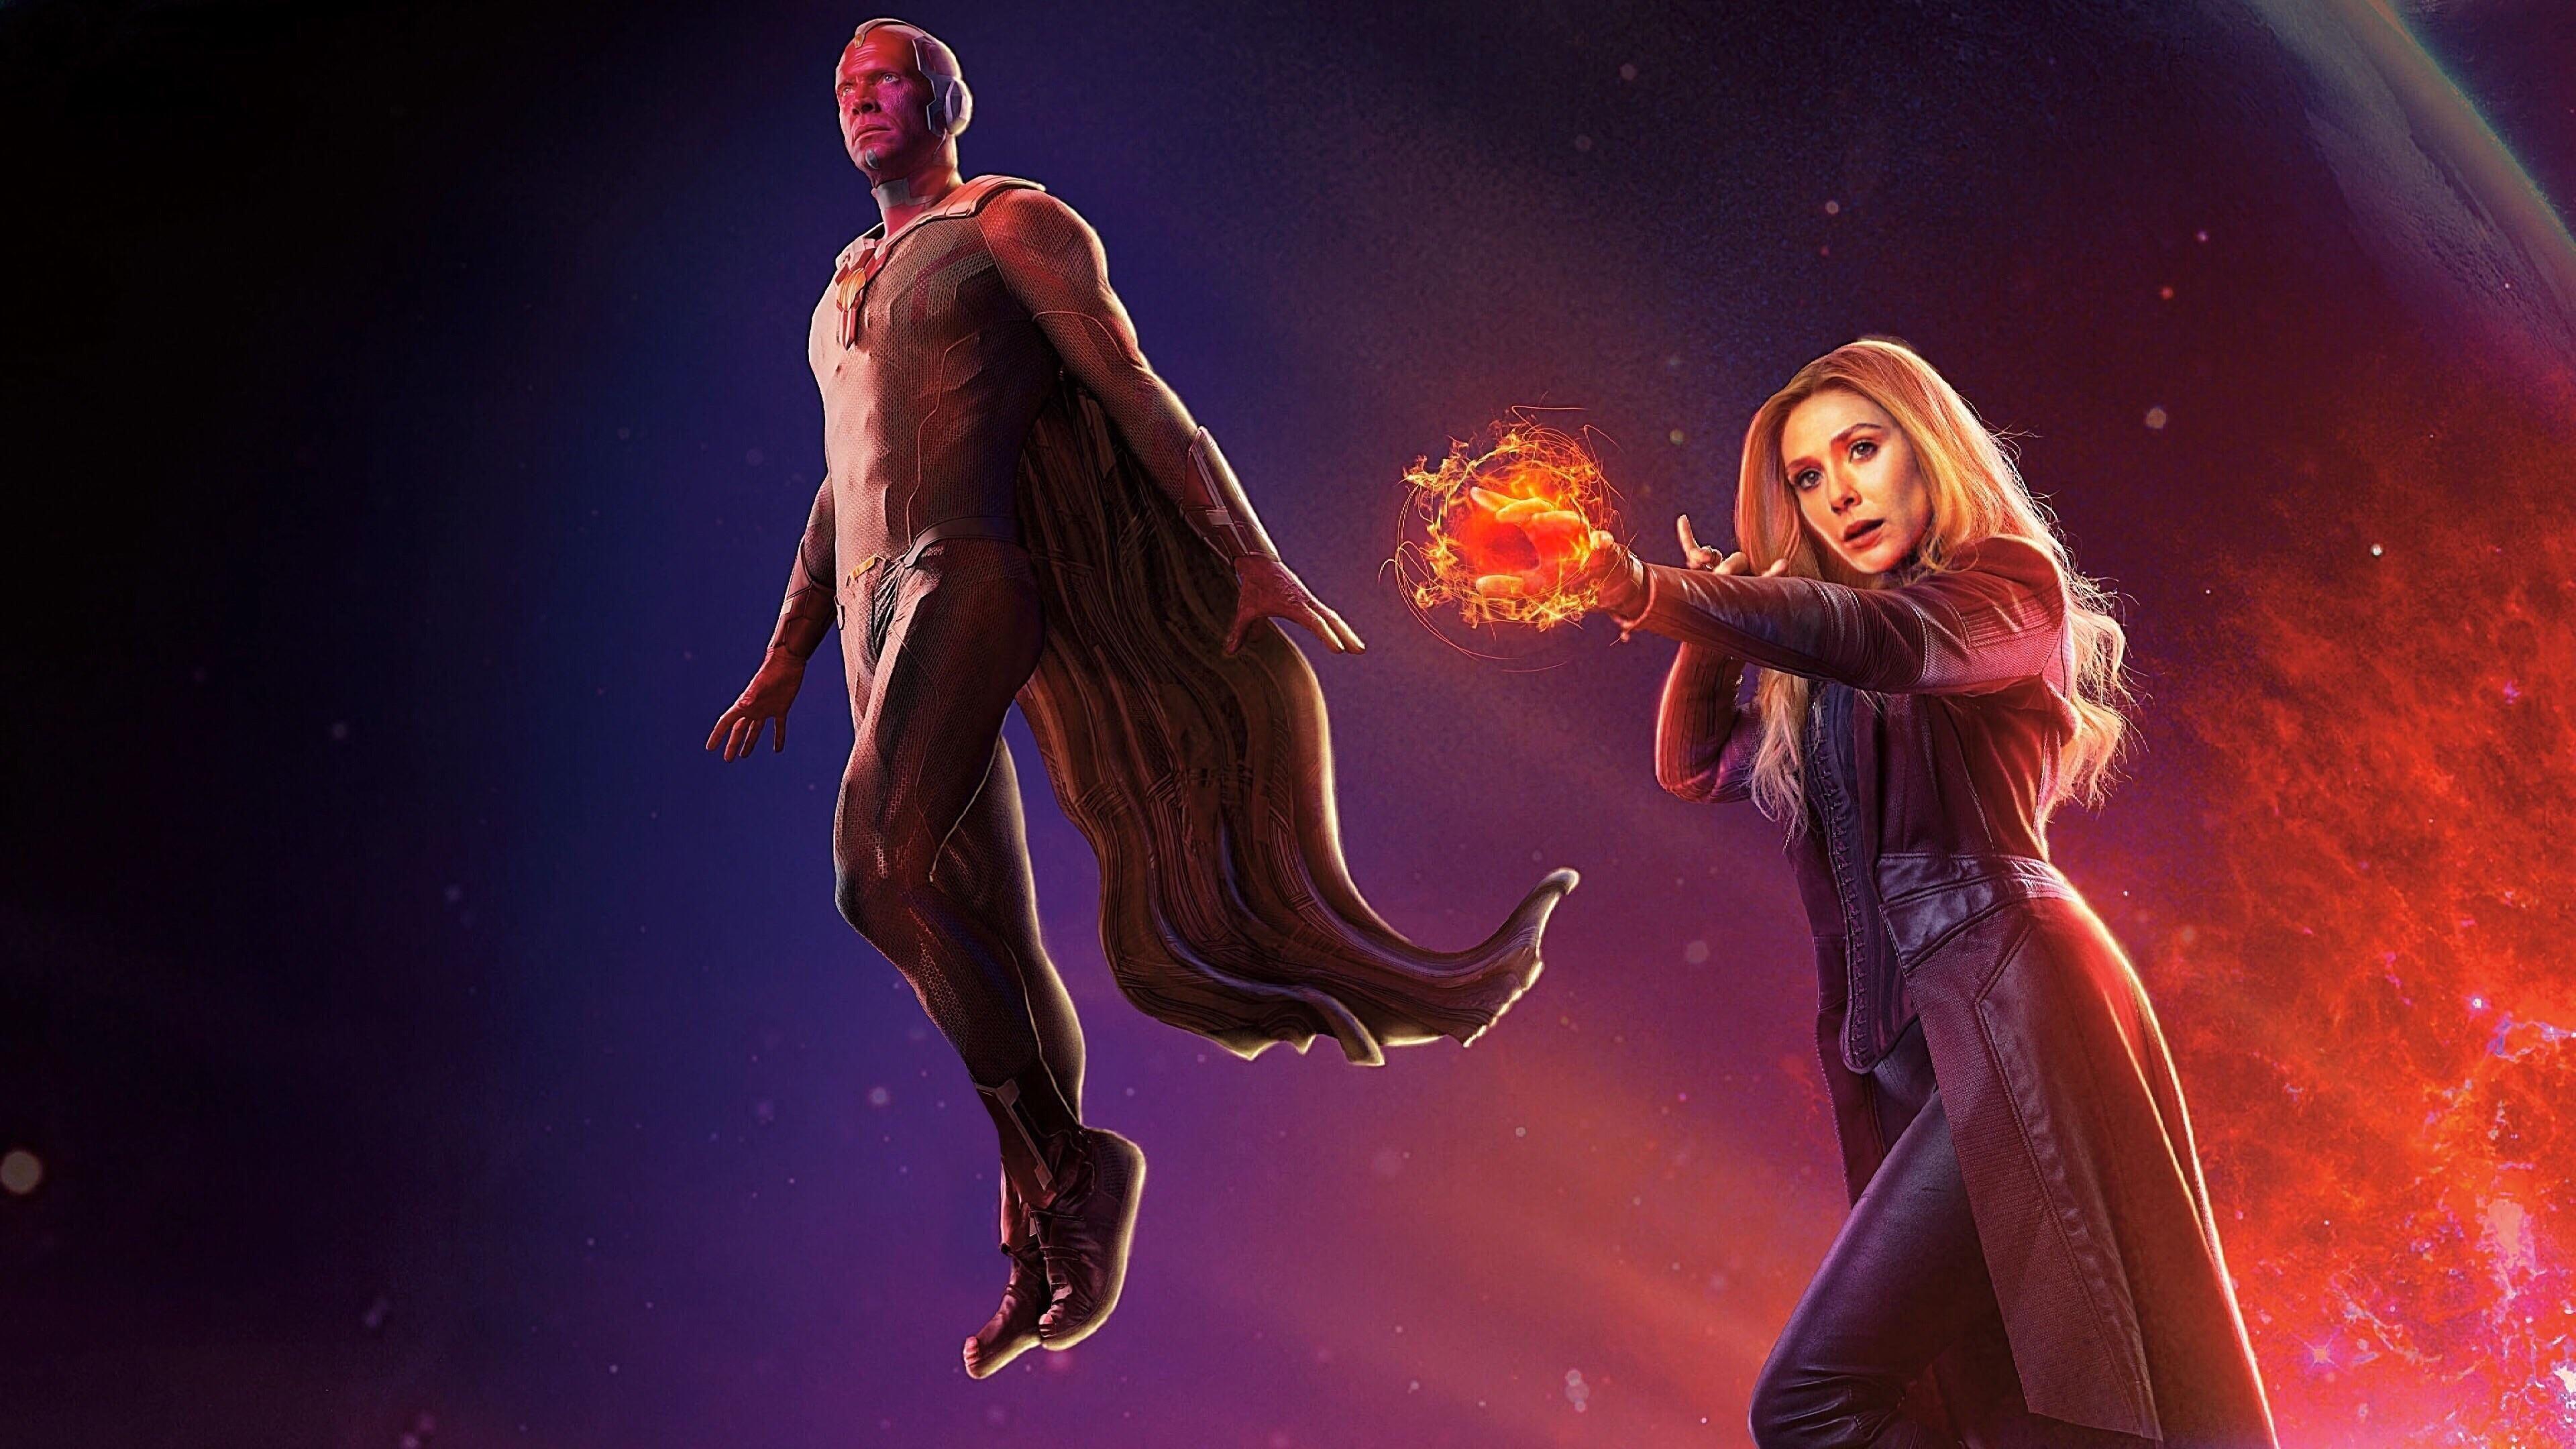 Avengers Infinity War Scarlet Witch and Vision 4k wallpaper!. Witch wallpaper, Marvel background, Marvel paintings